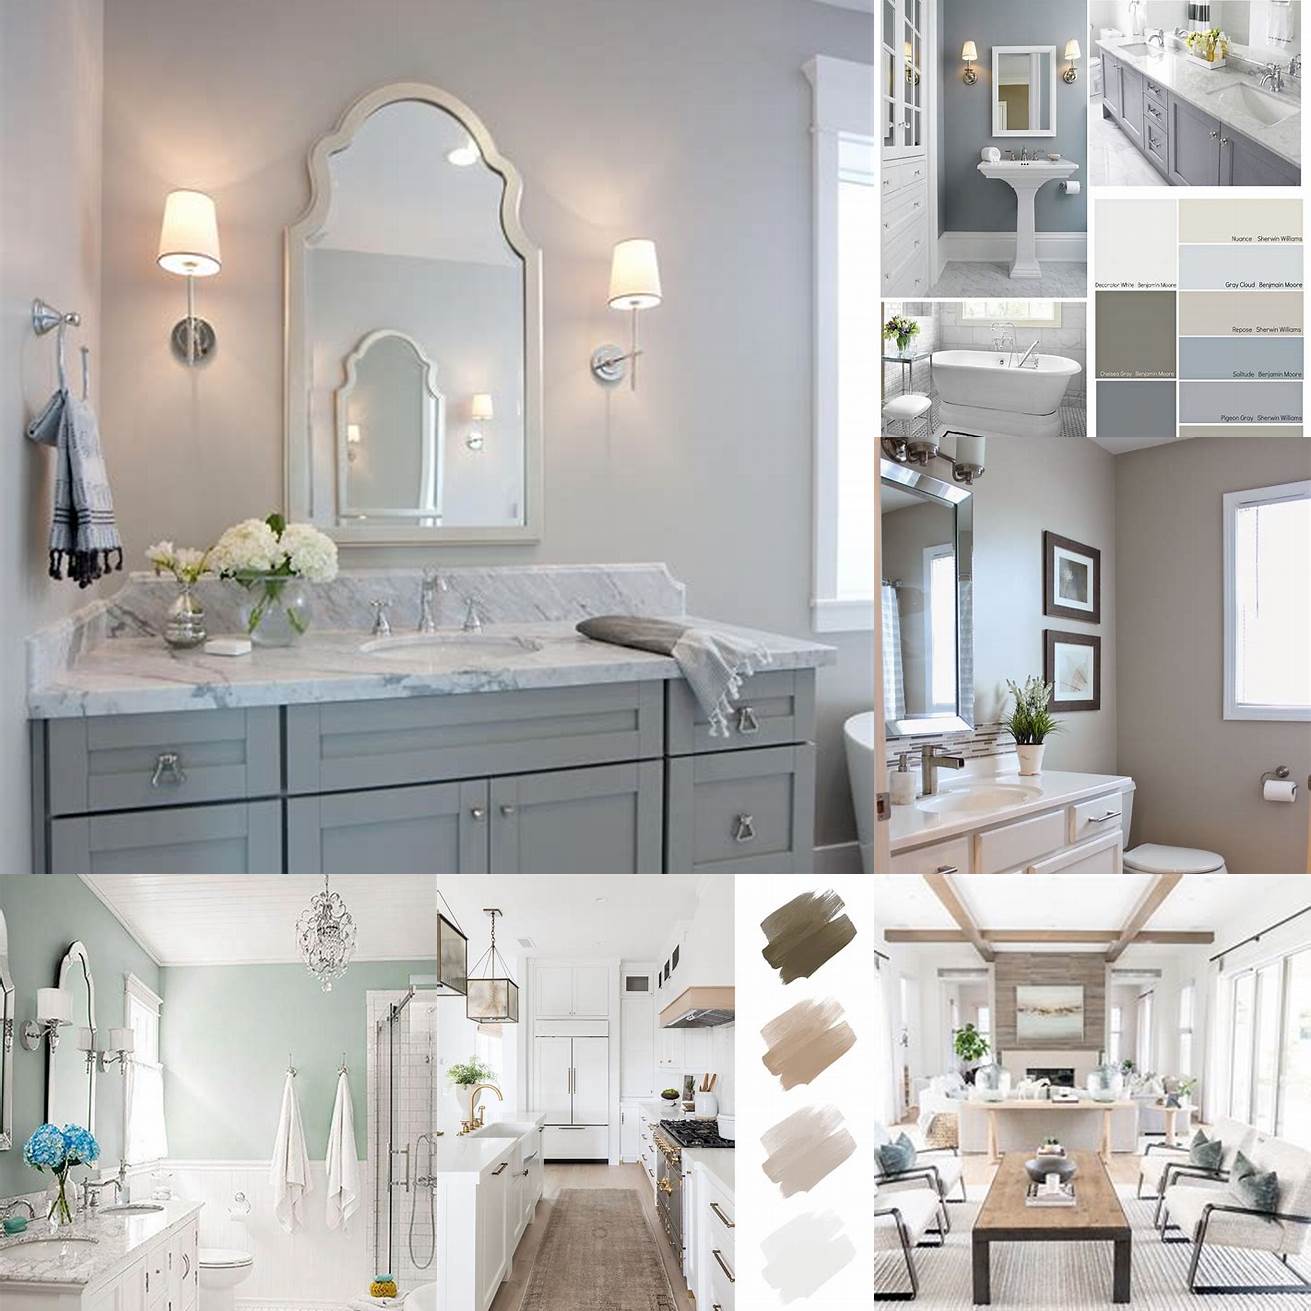 Choose a neutral color palette for the walls and floor to keep the focus on the vanity